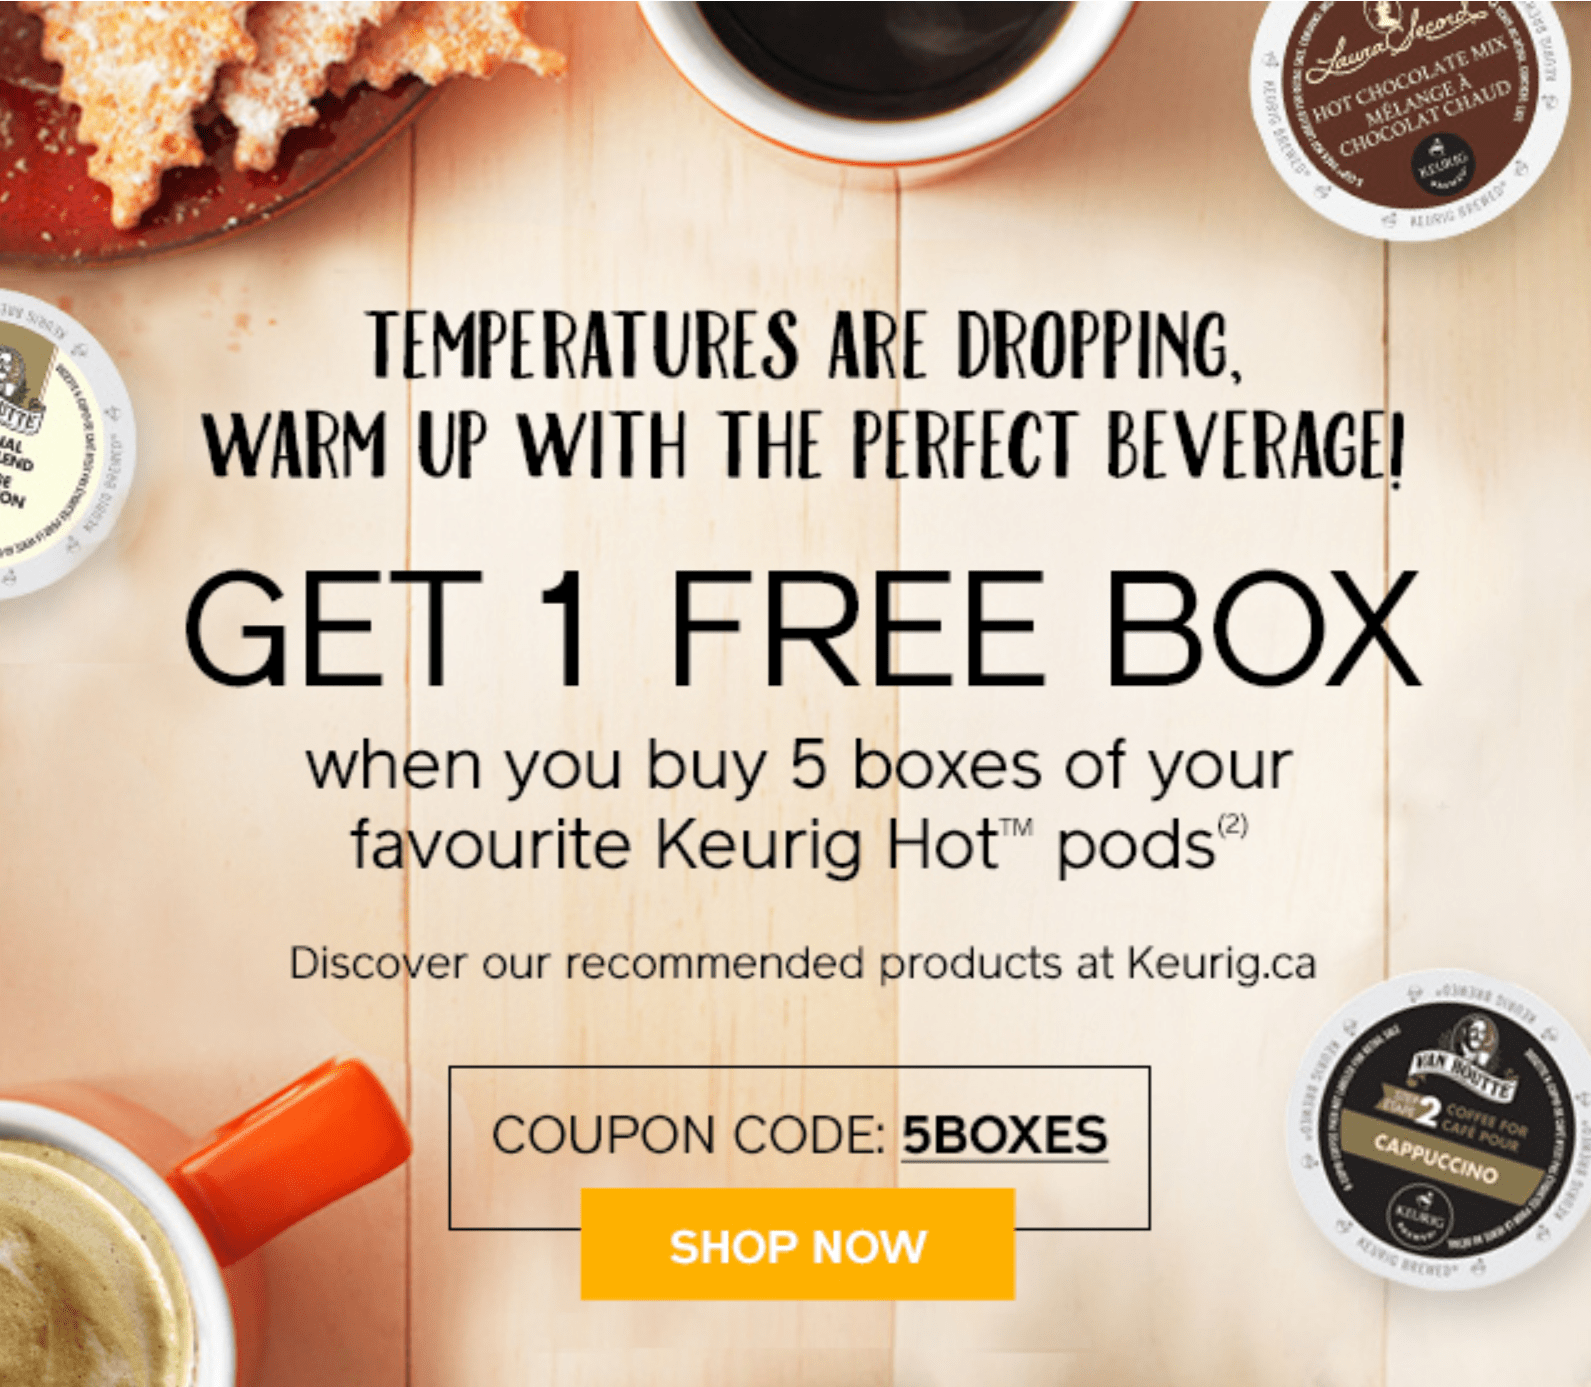 keurig-canada-coupon-code-deal-free-kcup-box-when-you-buy-5-boxes-of